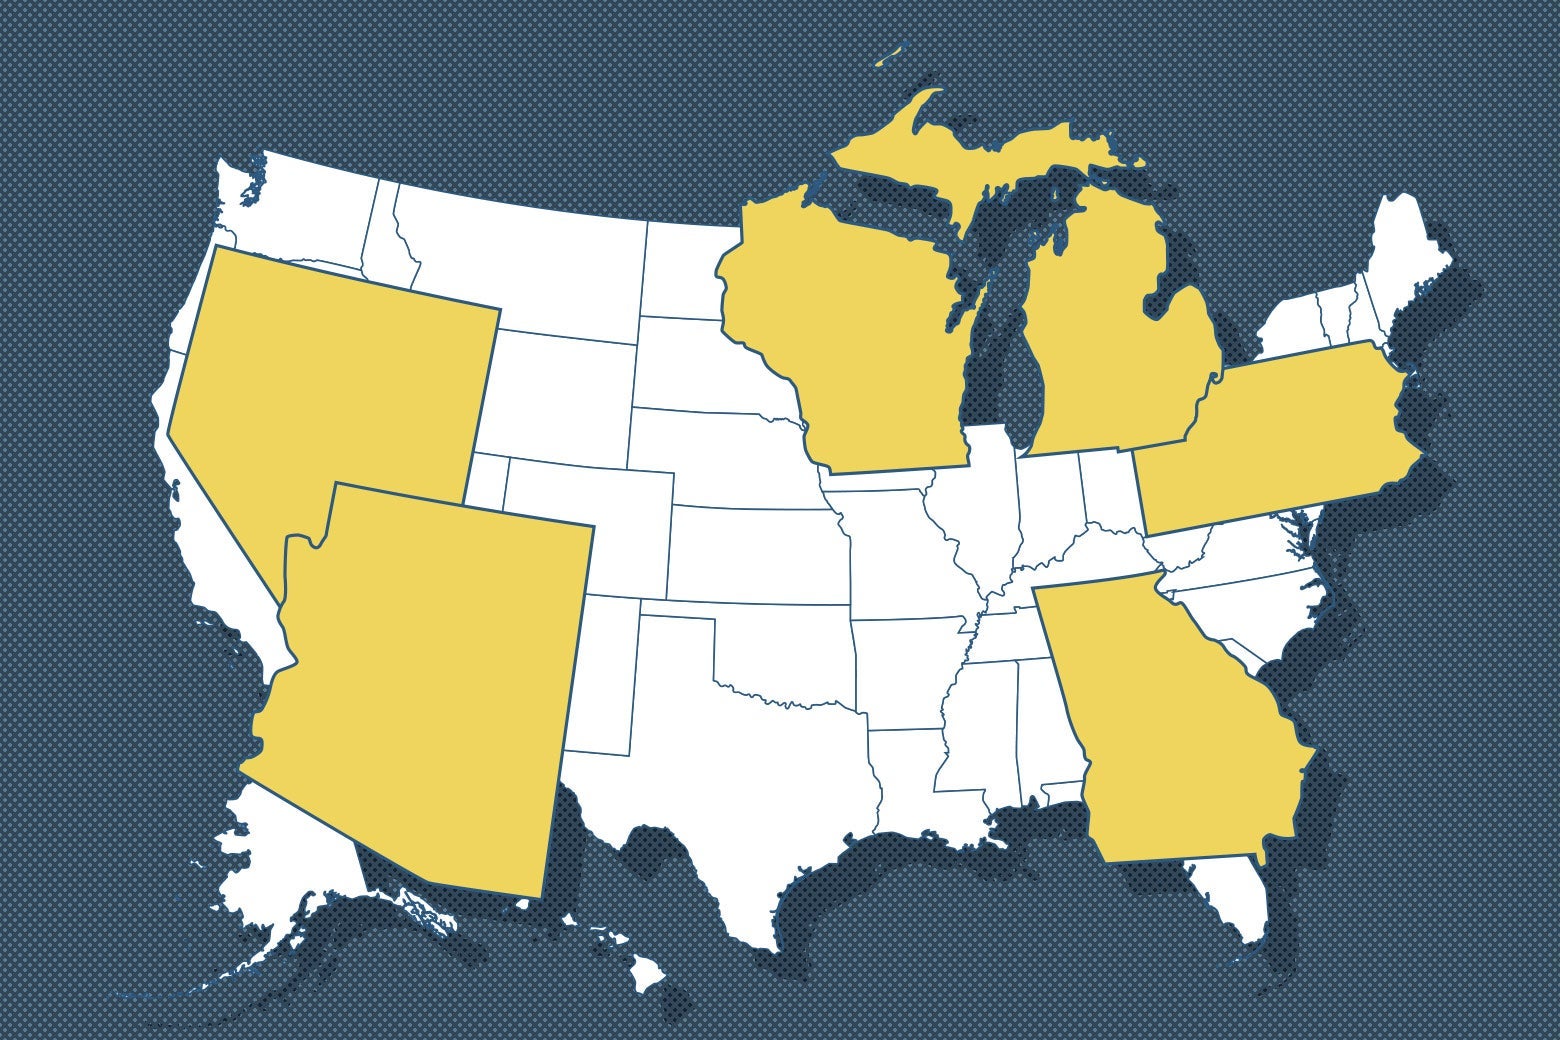 U.S. map with Nevada, Arizona, Wisconsin, Michigan, Pennsylvania, and Georgia in yellow and blown up in proportion to the other states